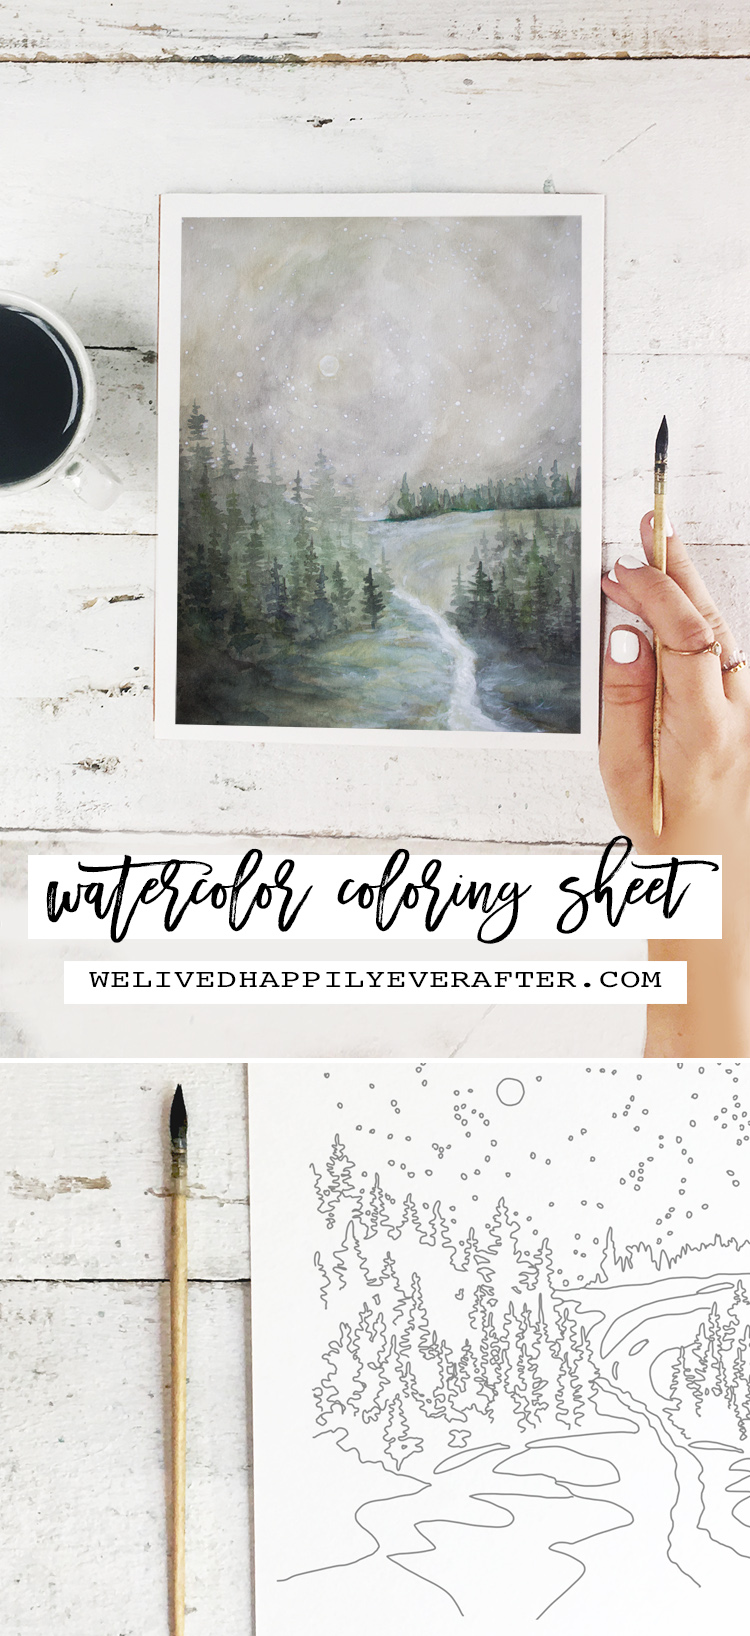 Watercolor Coloring Sheet (For Adults!) Starry Field Of Dreams -Perfect For A DIY Girls Painting Party Night!